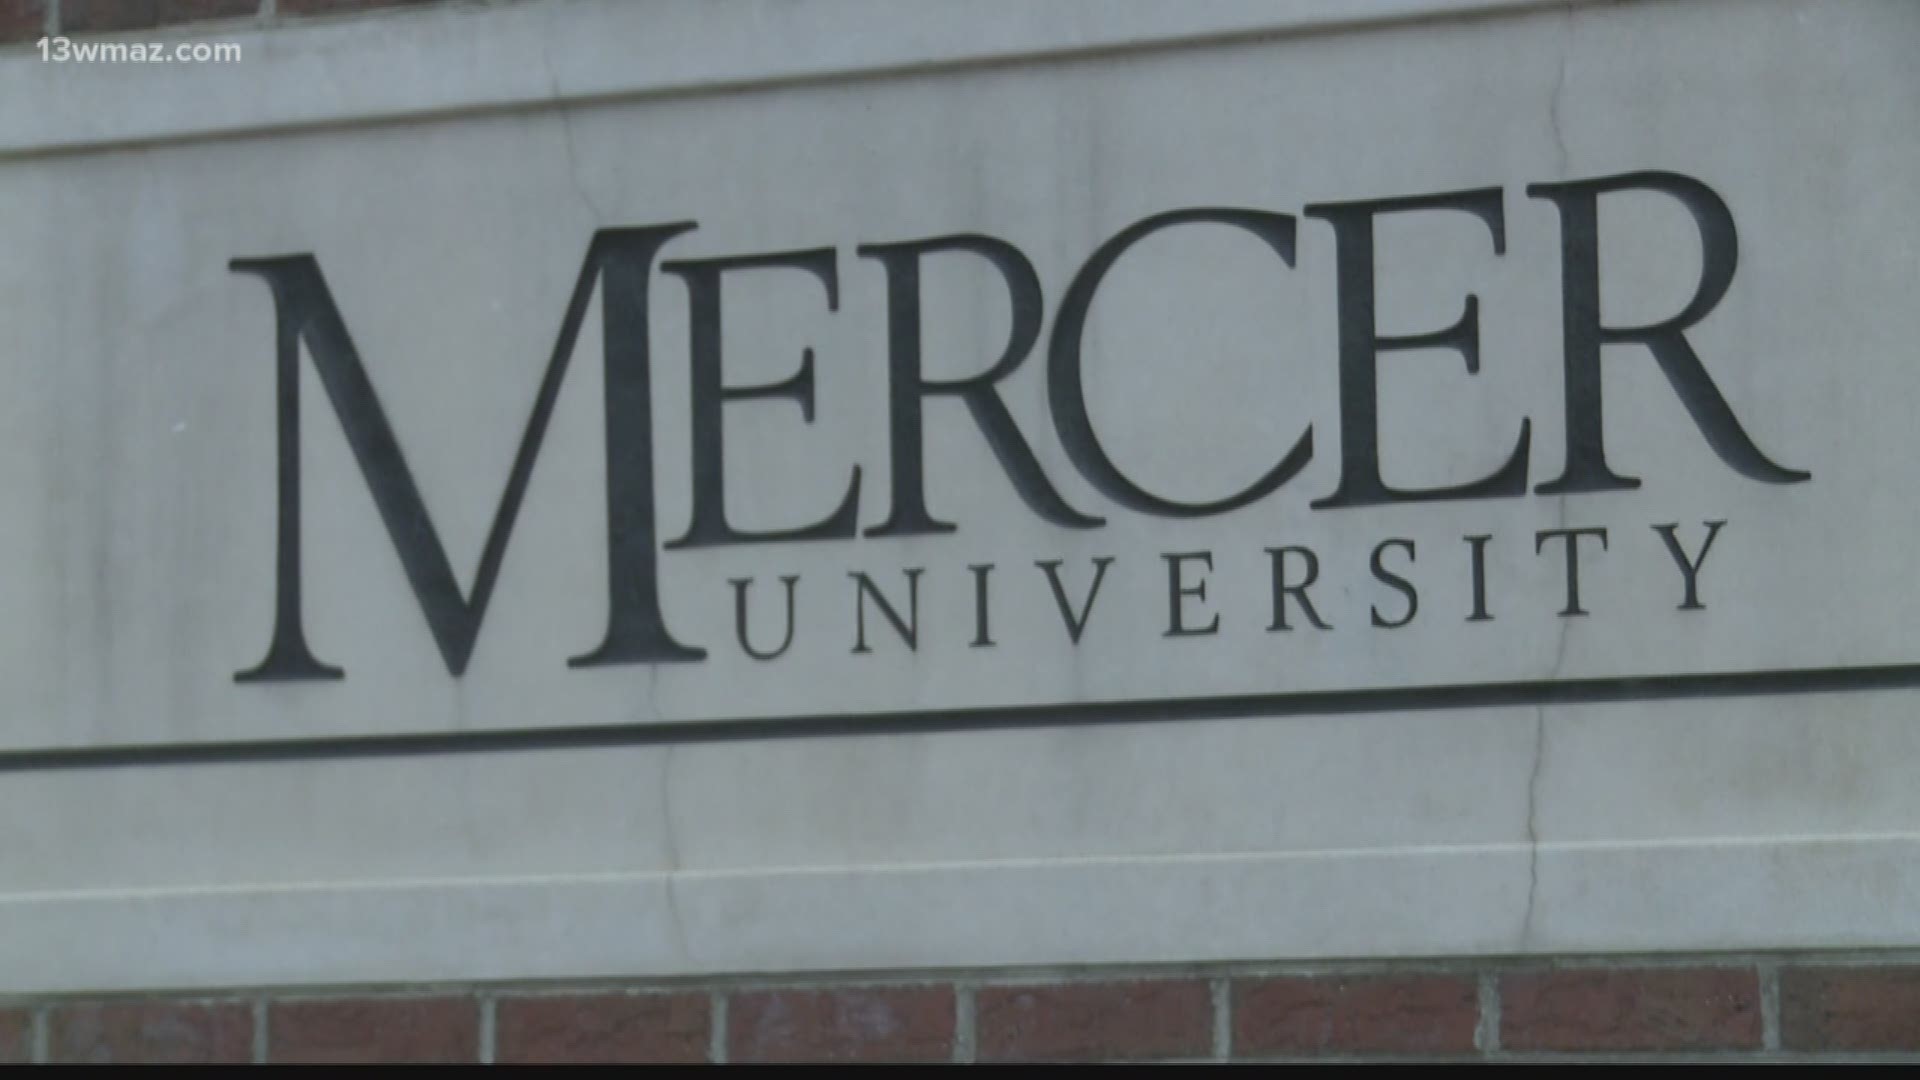 Police: Driver pointed gun at Mercer student